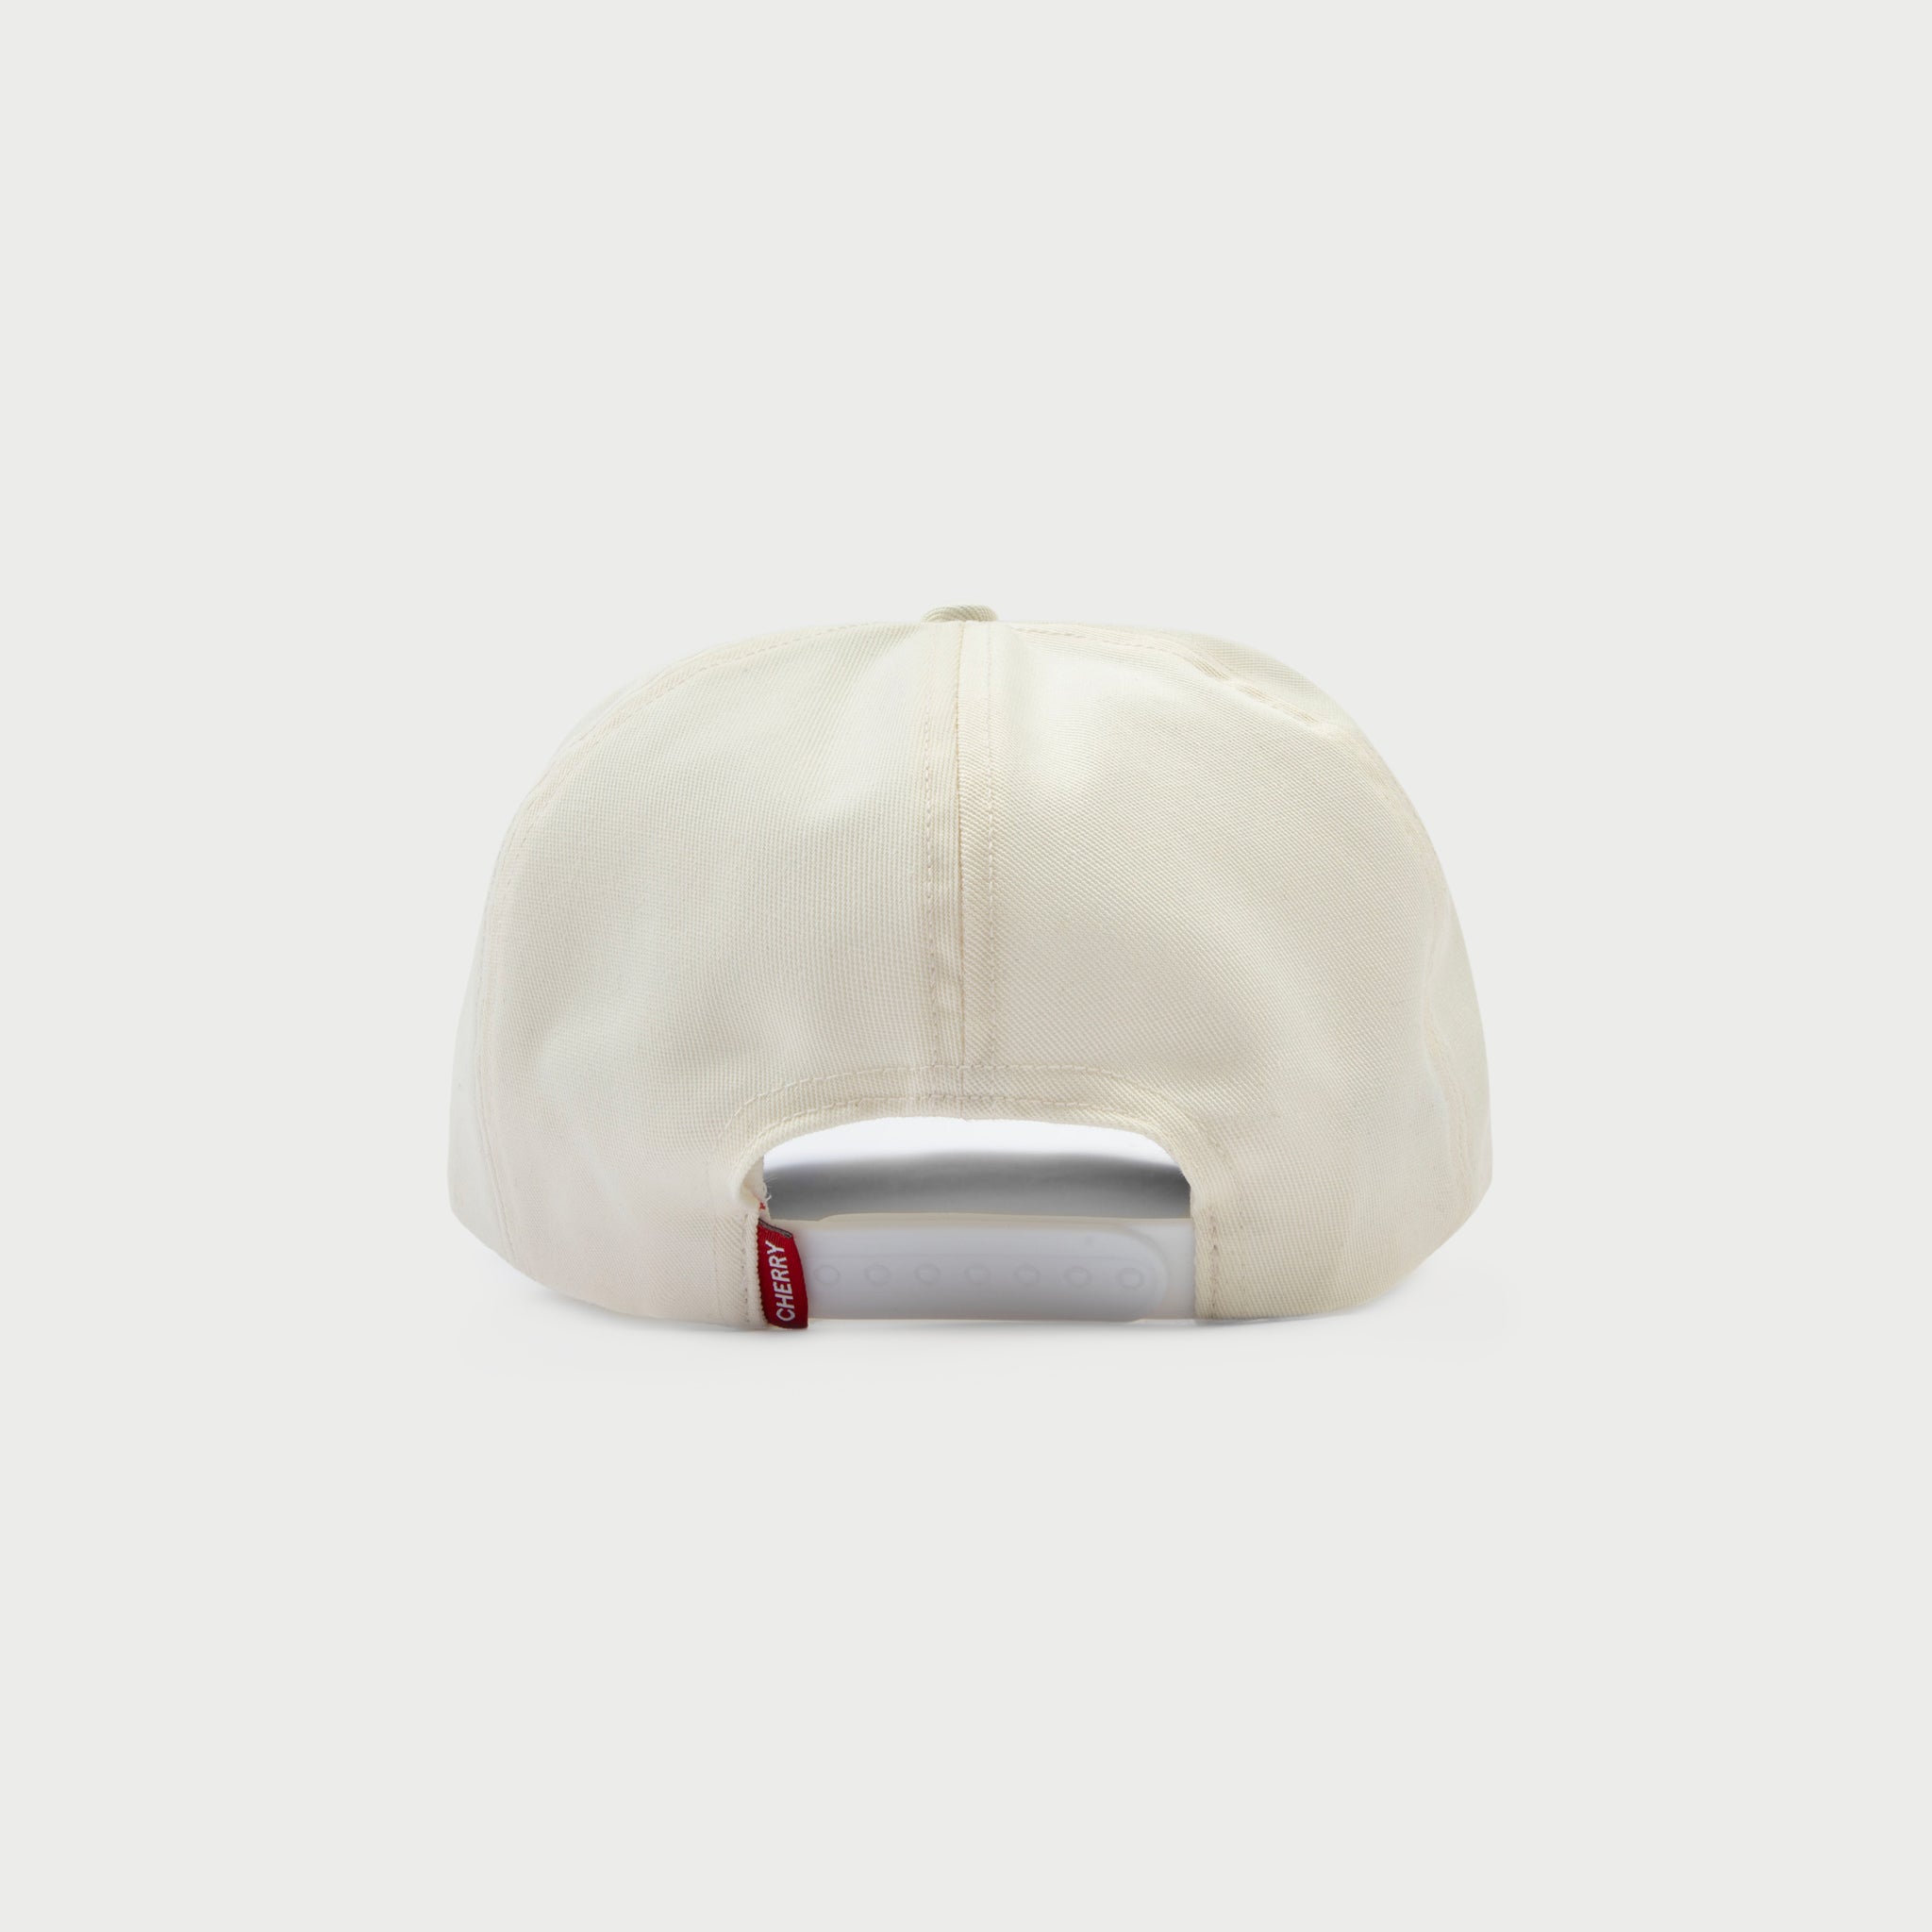 Trophy 5 Panel (Ivory/Red)